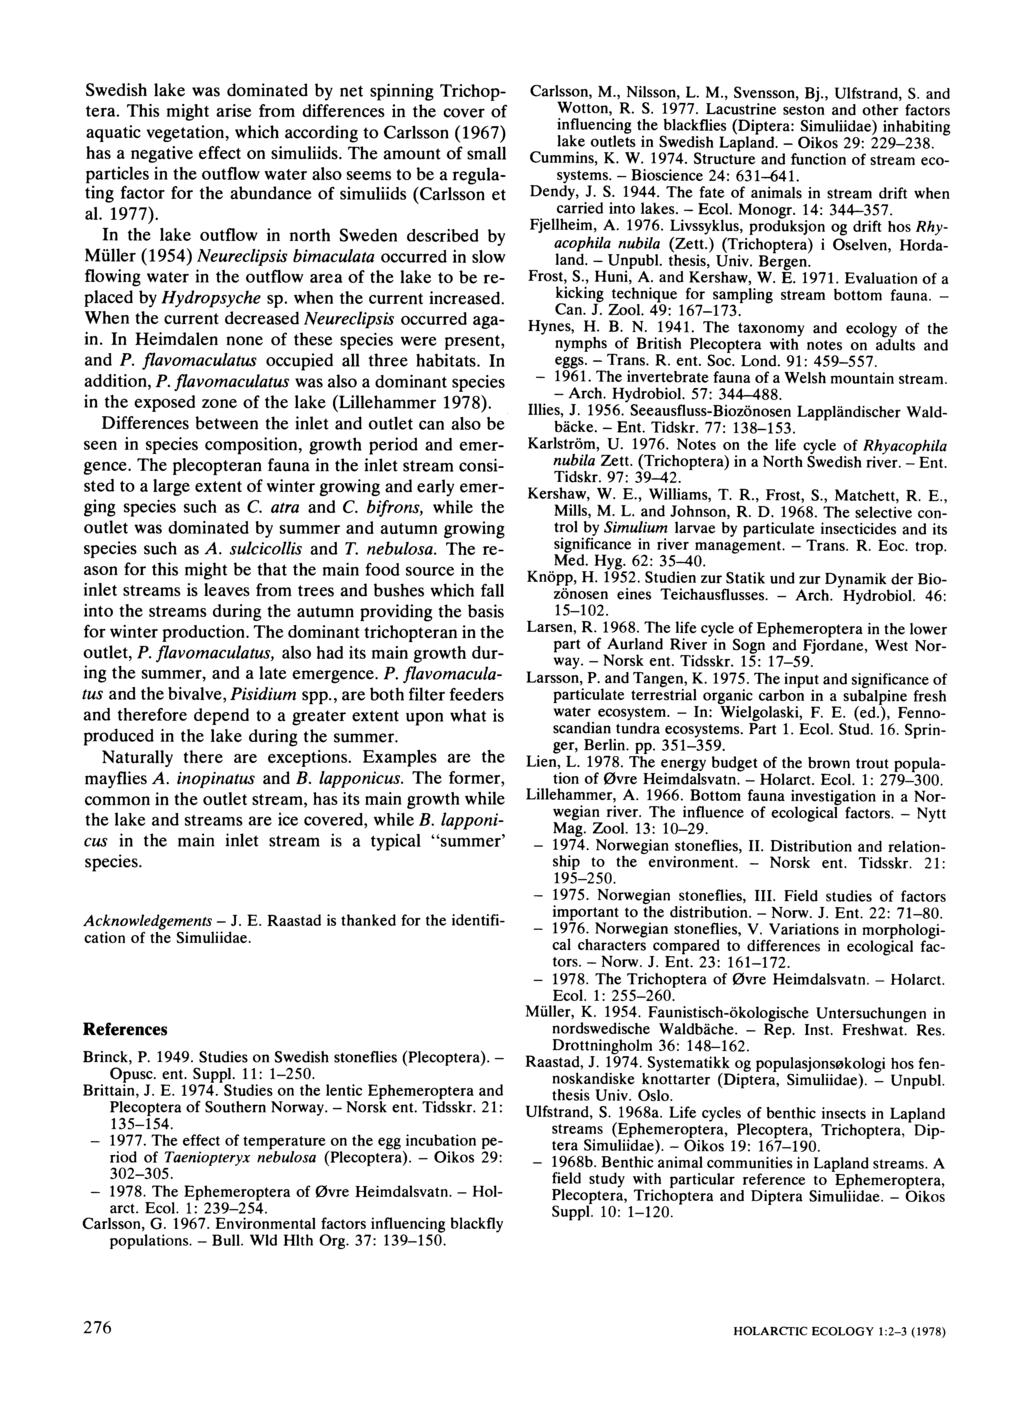 Swedish lake was dominated by net spinning Trichoptera. This might arise from differences in the cover of aquatic vegetation, which according to Carlsson (1967) has a negative effect on simuliids.